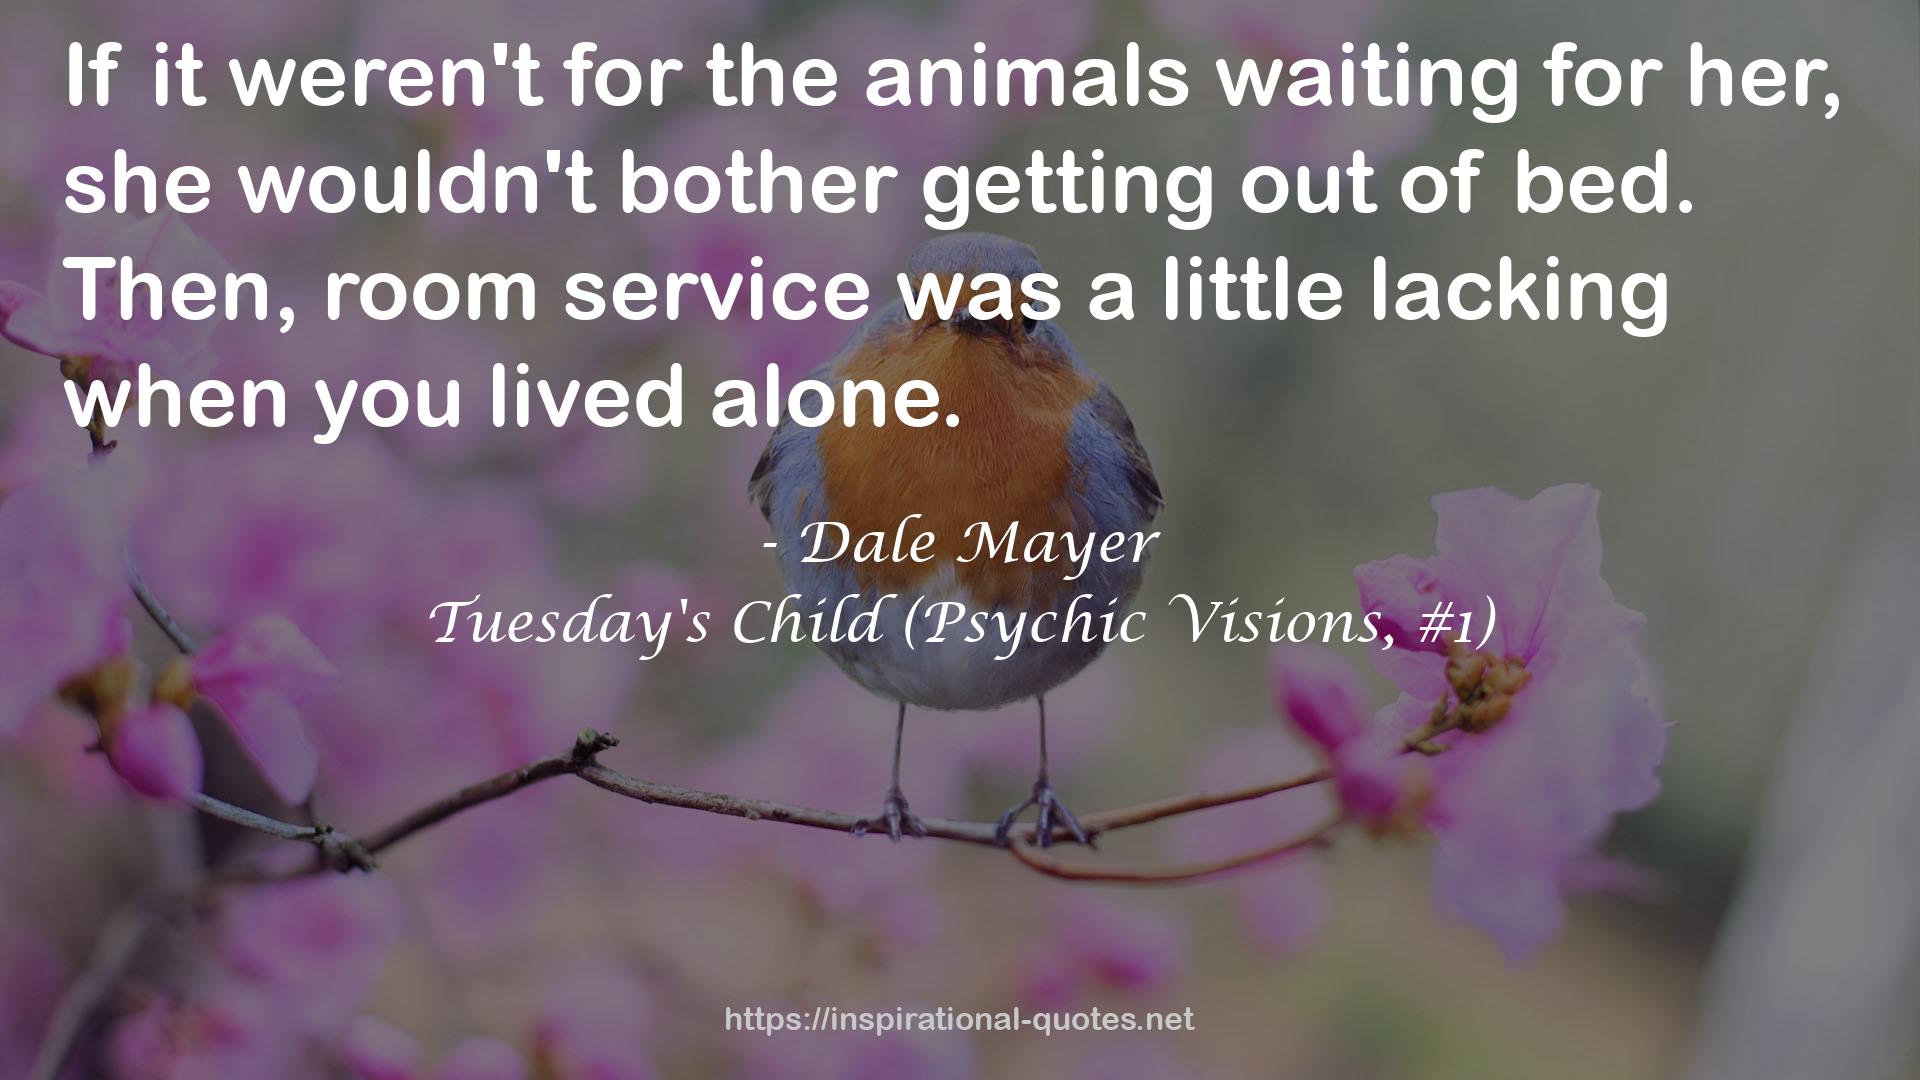 Tuesday's Child (Psychic Visions, #1) QUOTES